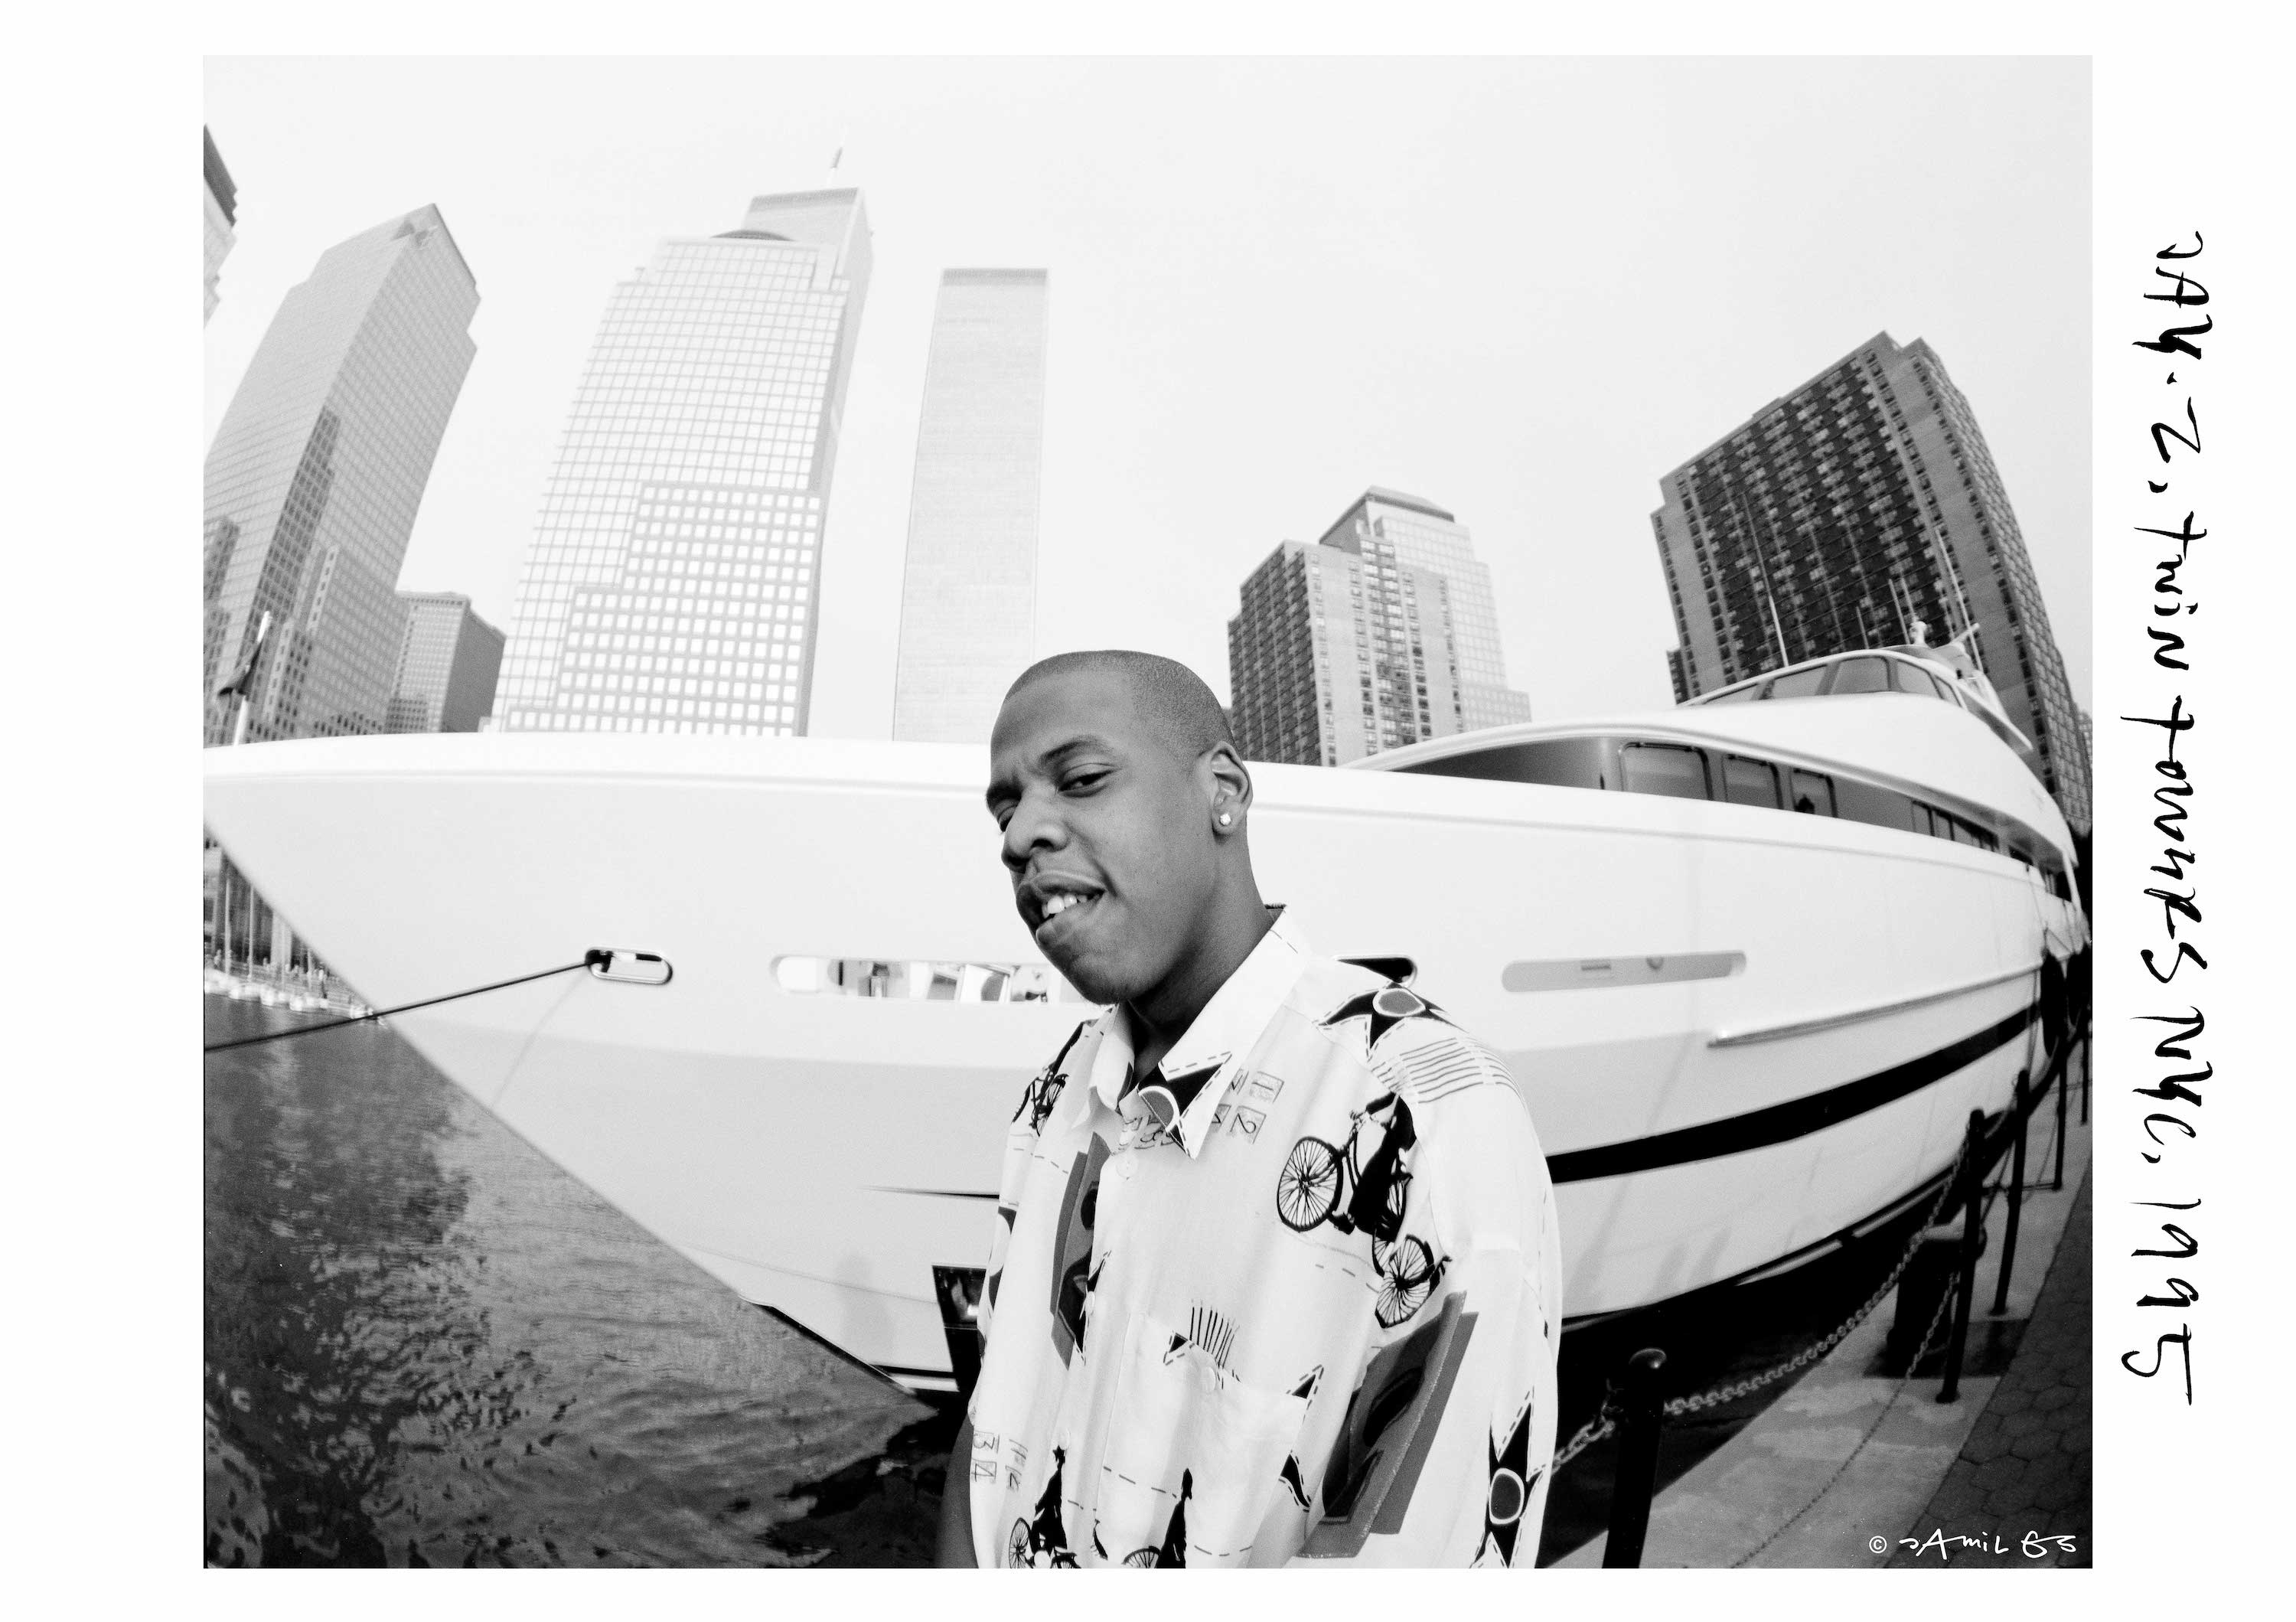 Candid, Personal Photos from Hip-Hop's '90s Heyday - The New York